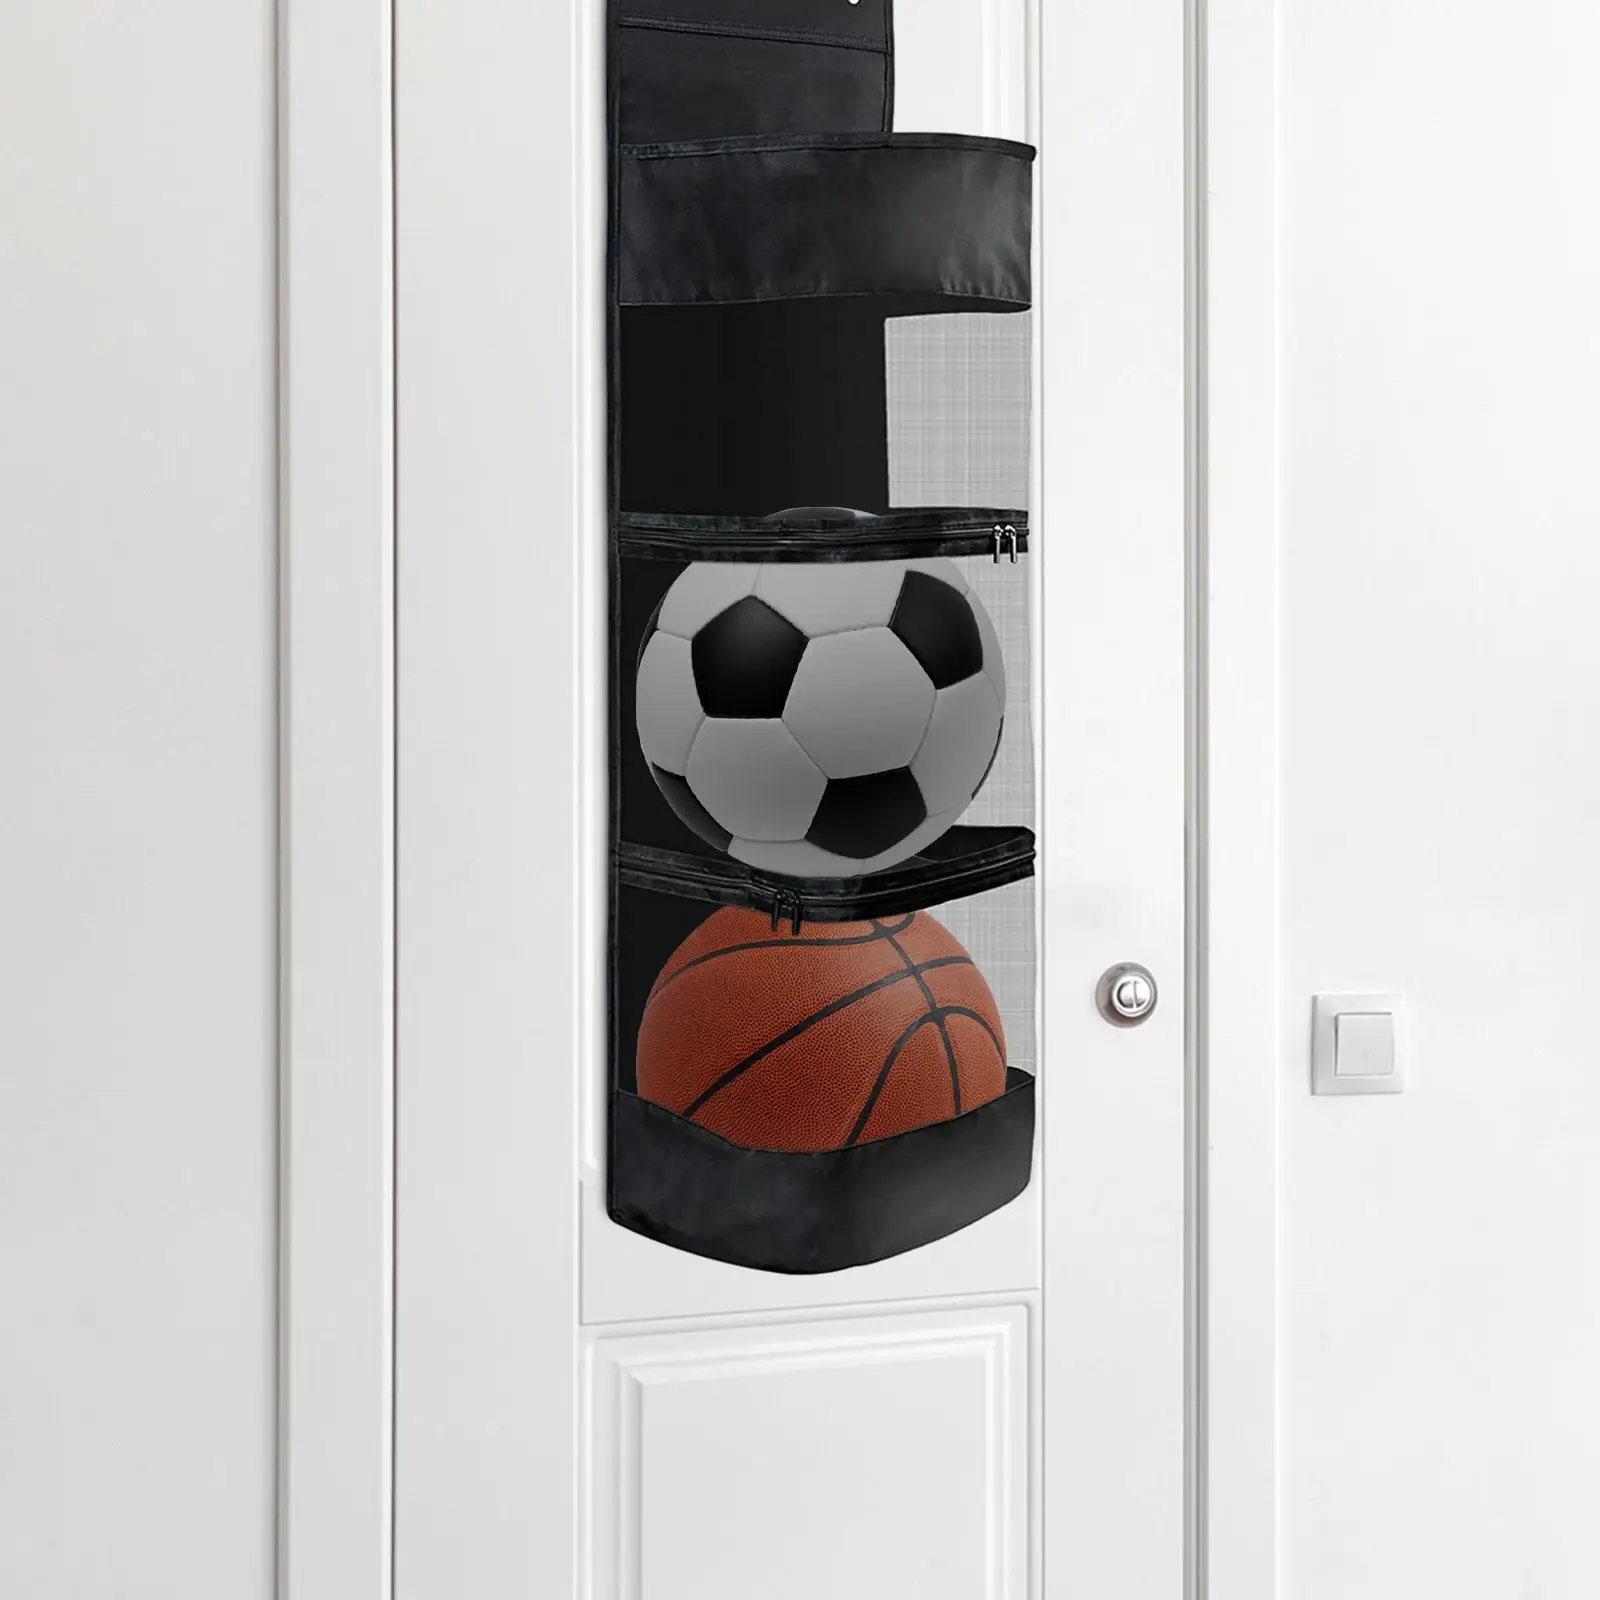 over The Door Hanging Equipment Organizer for Sports Gear Soccer